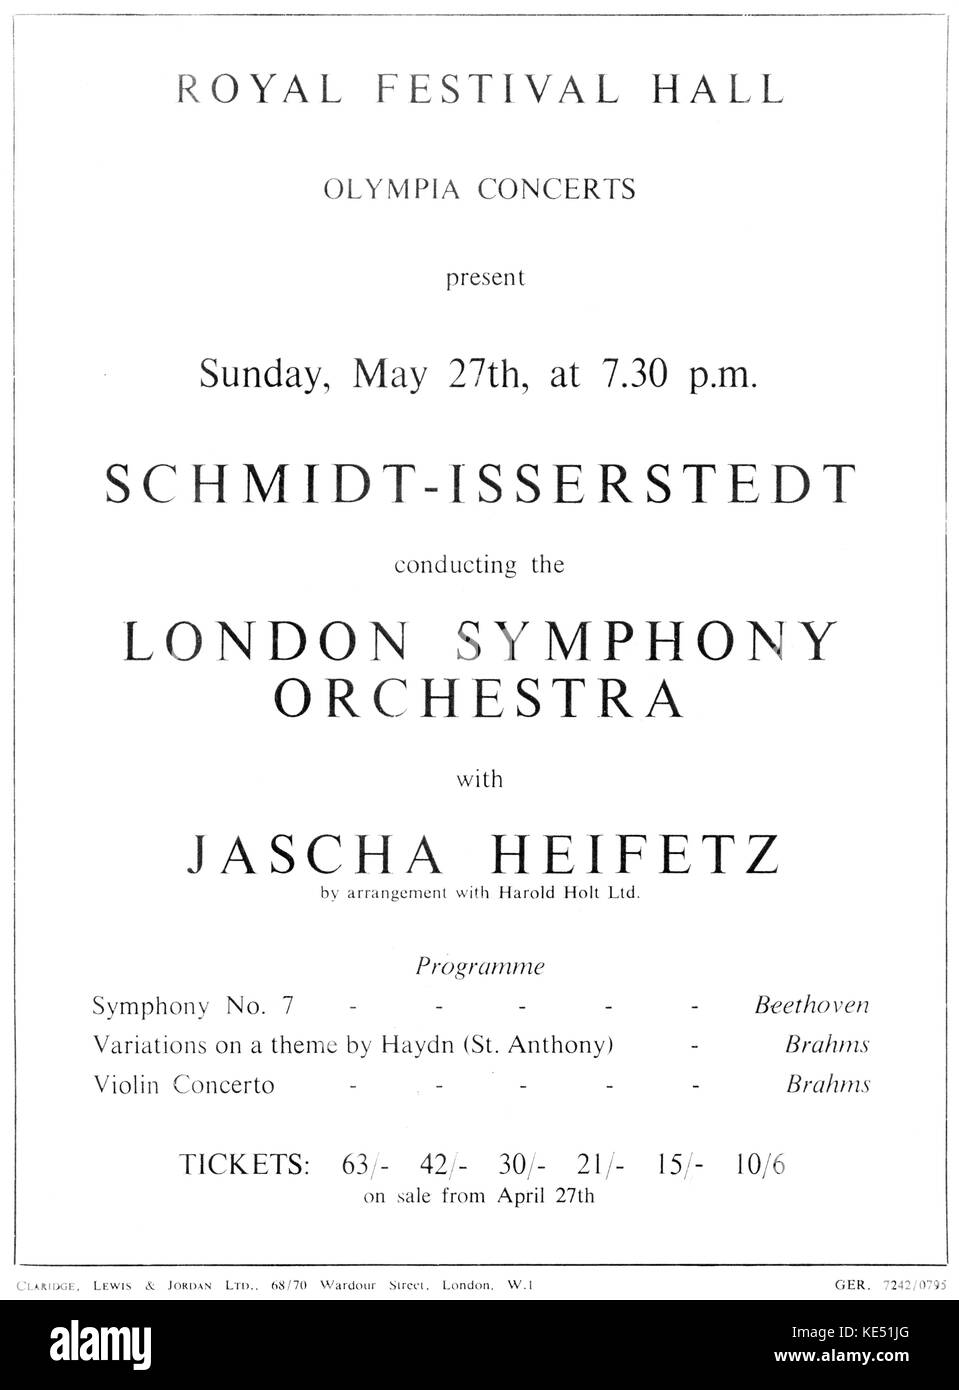 Jascha Heifetz - poster for a concert in which the Lithuanian American violinist performed with the London Symphony Orchestra at the Royal Festival Hall, London, England. Conductor: Schmidt - Isserstedt. JH: 2 February 1901 - 10 December 1987. Stock Photo